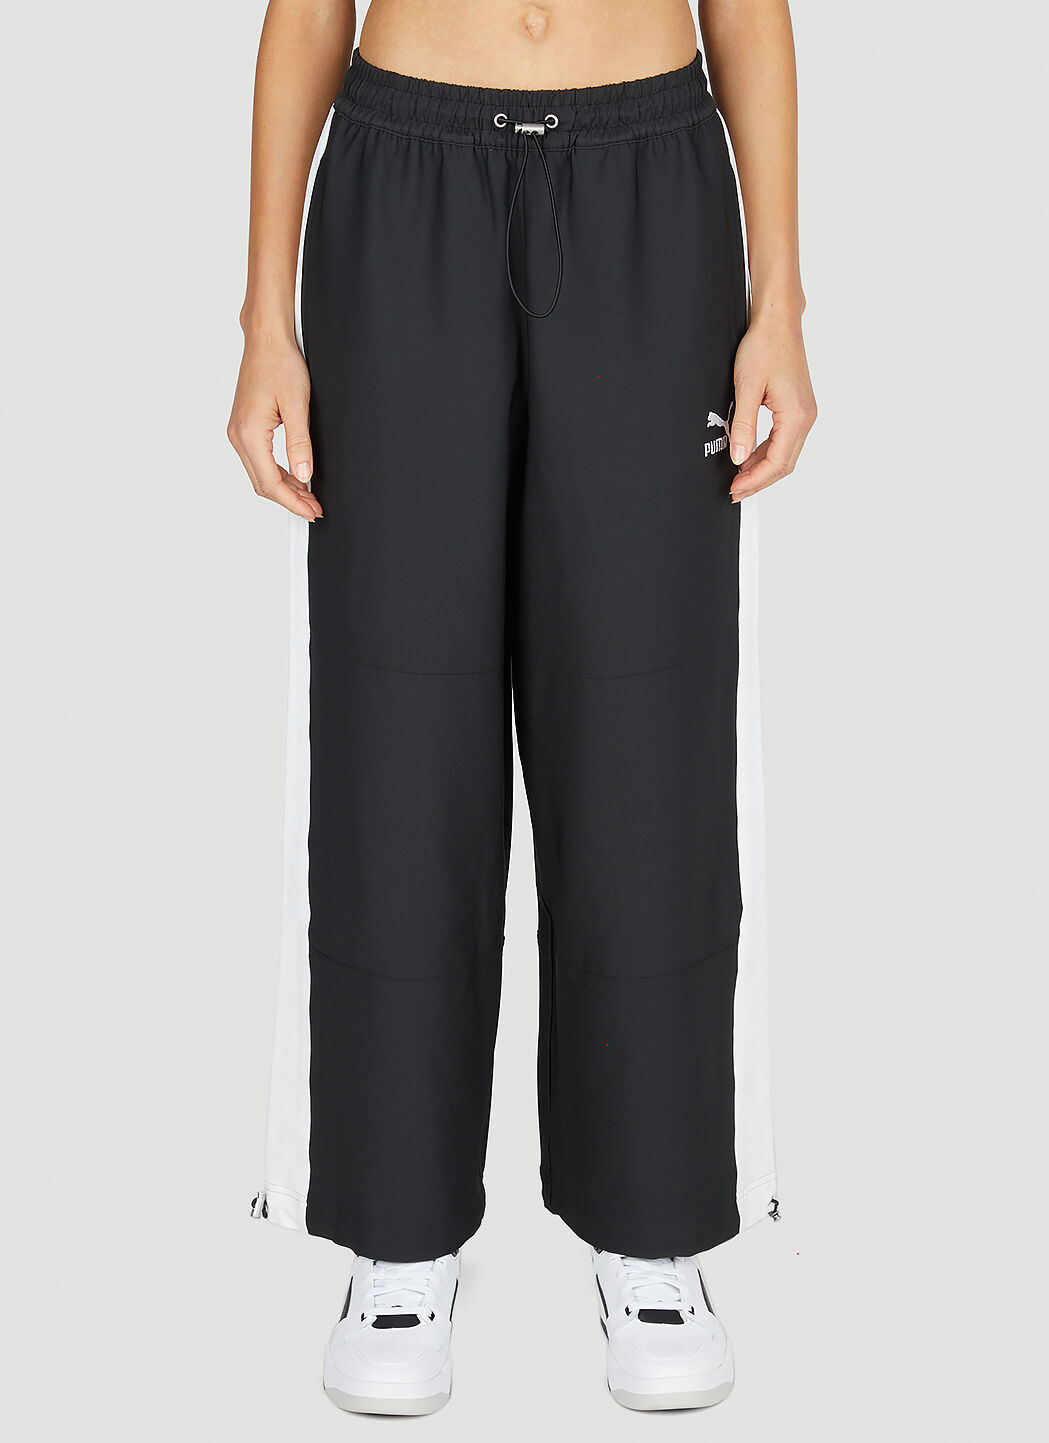 Alexander Wang Couture Sport T7 Track Pants Blue awg0255038